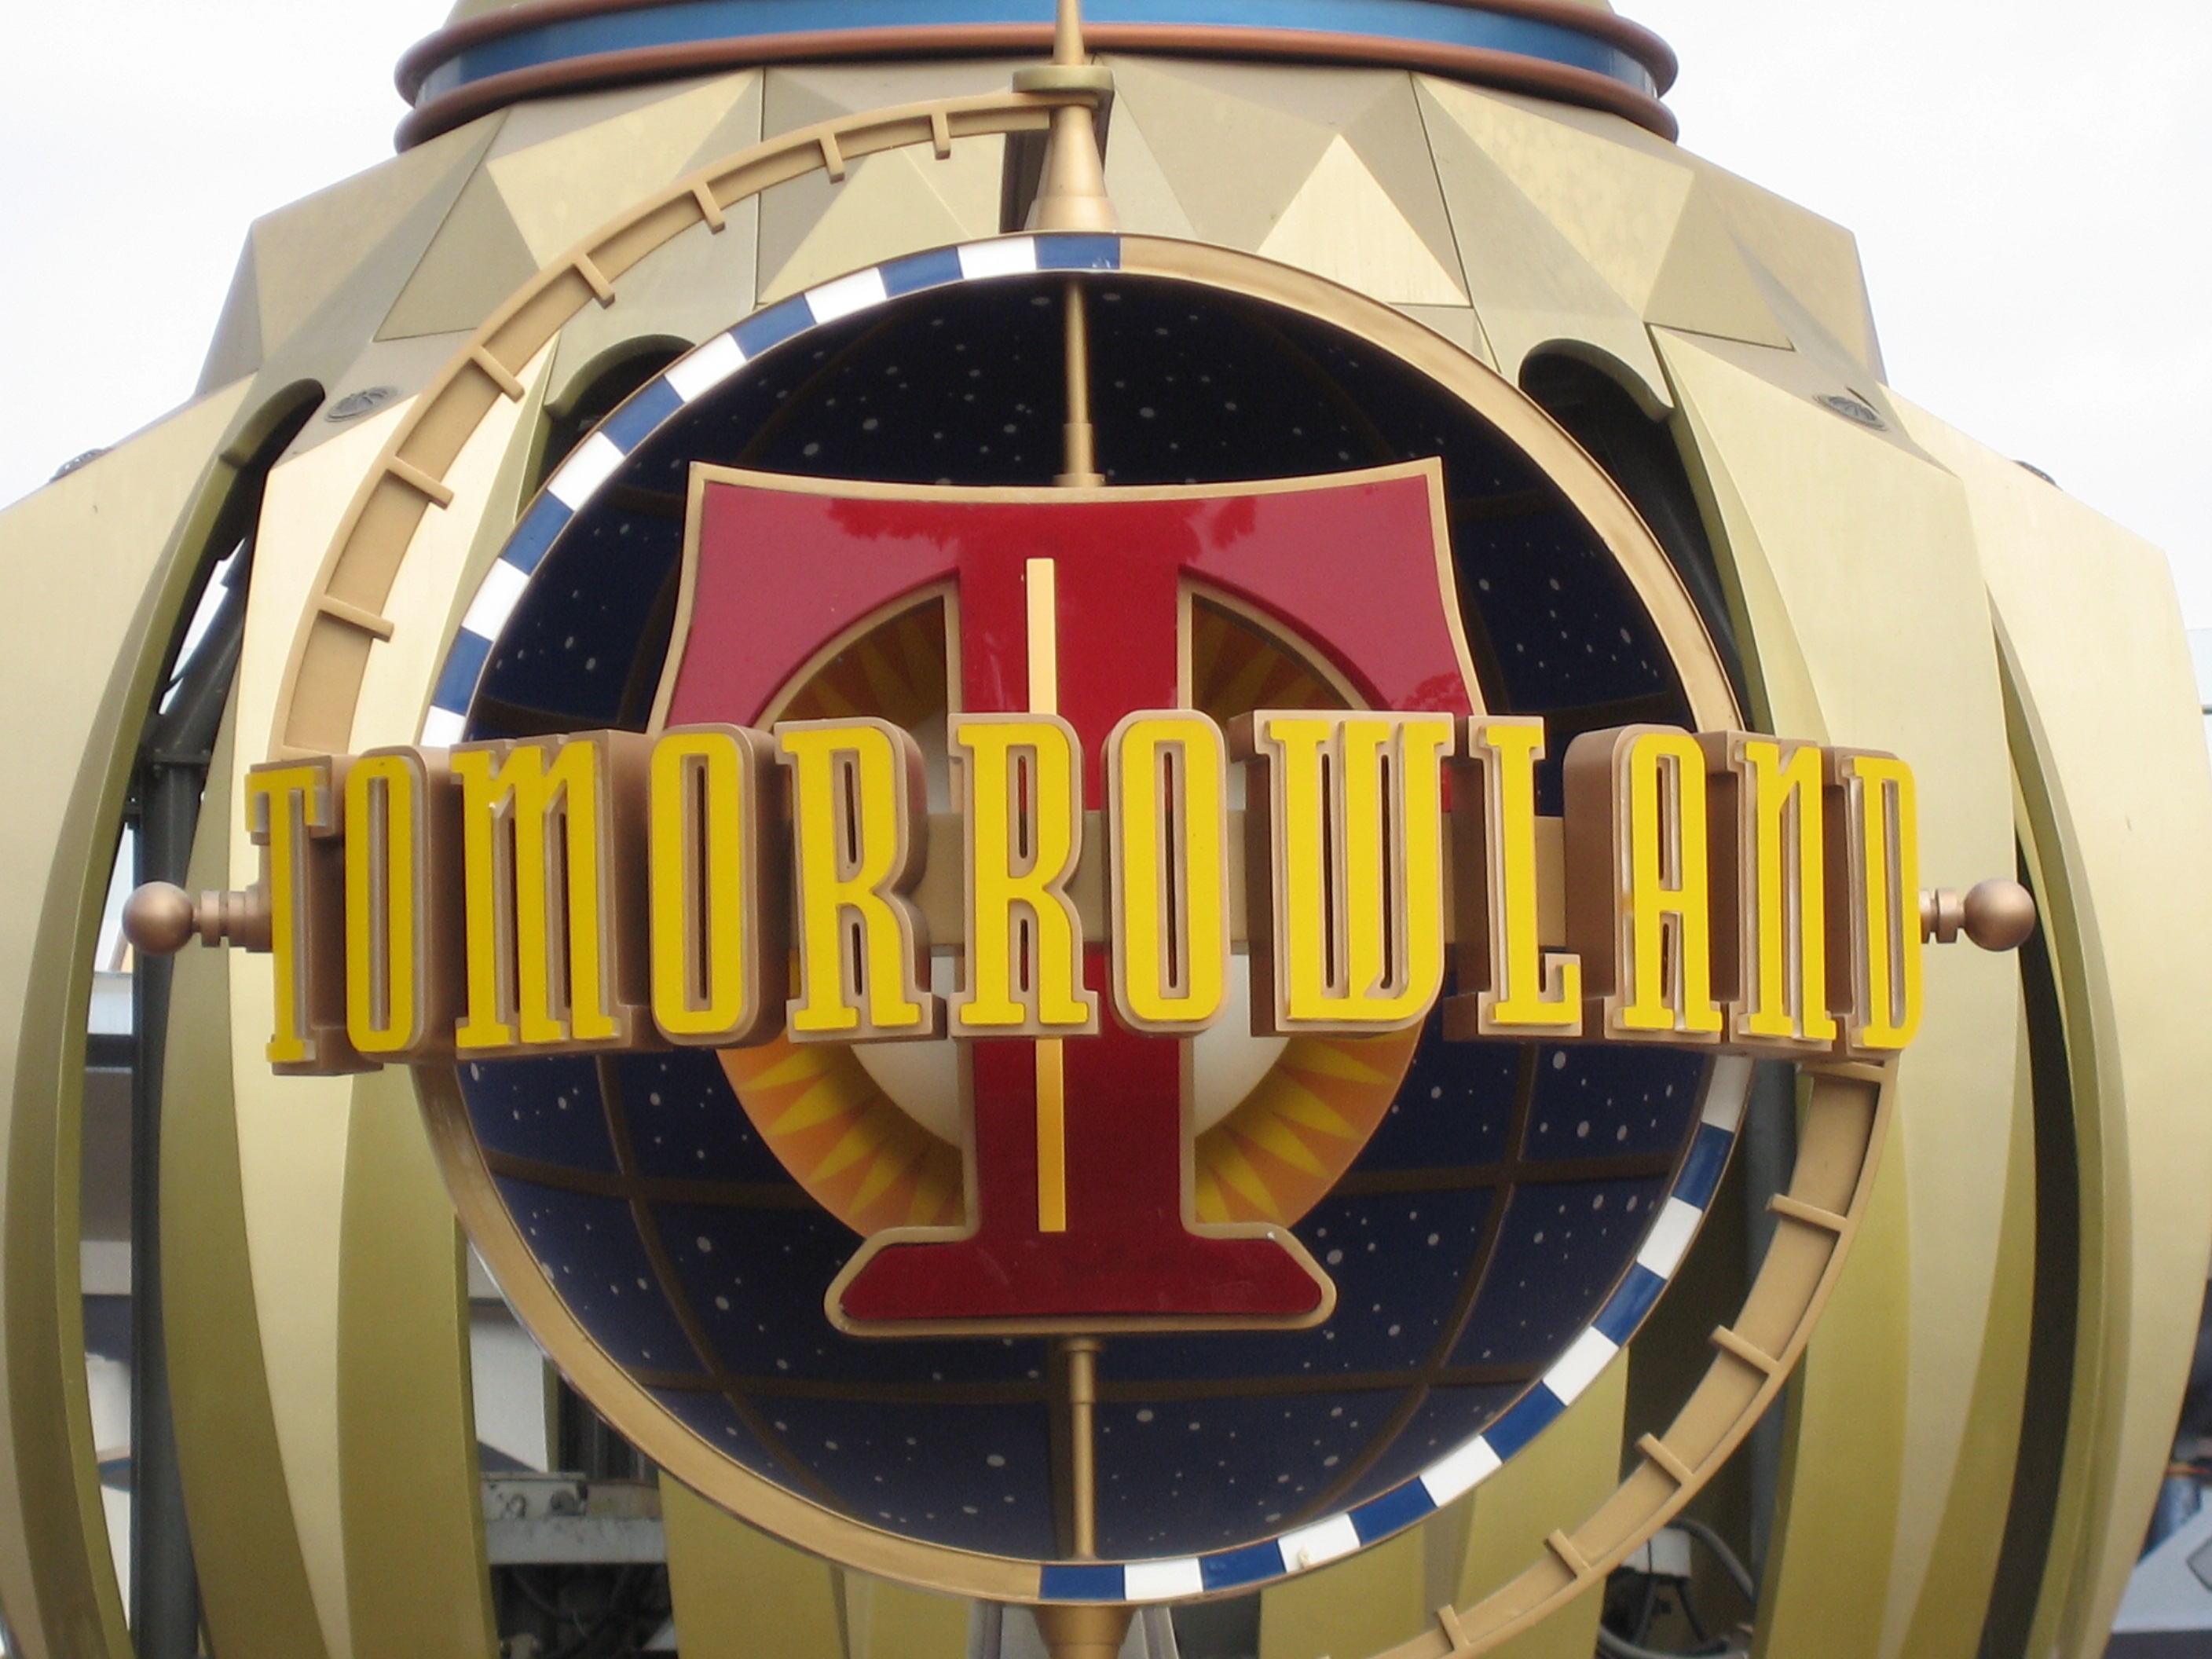 Tomorrowland Projects :: Photos, videos, logos, illustrations and branding  :: Behance